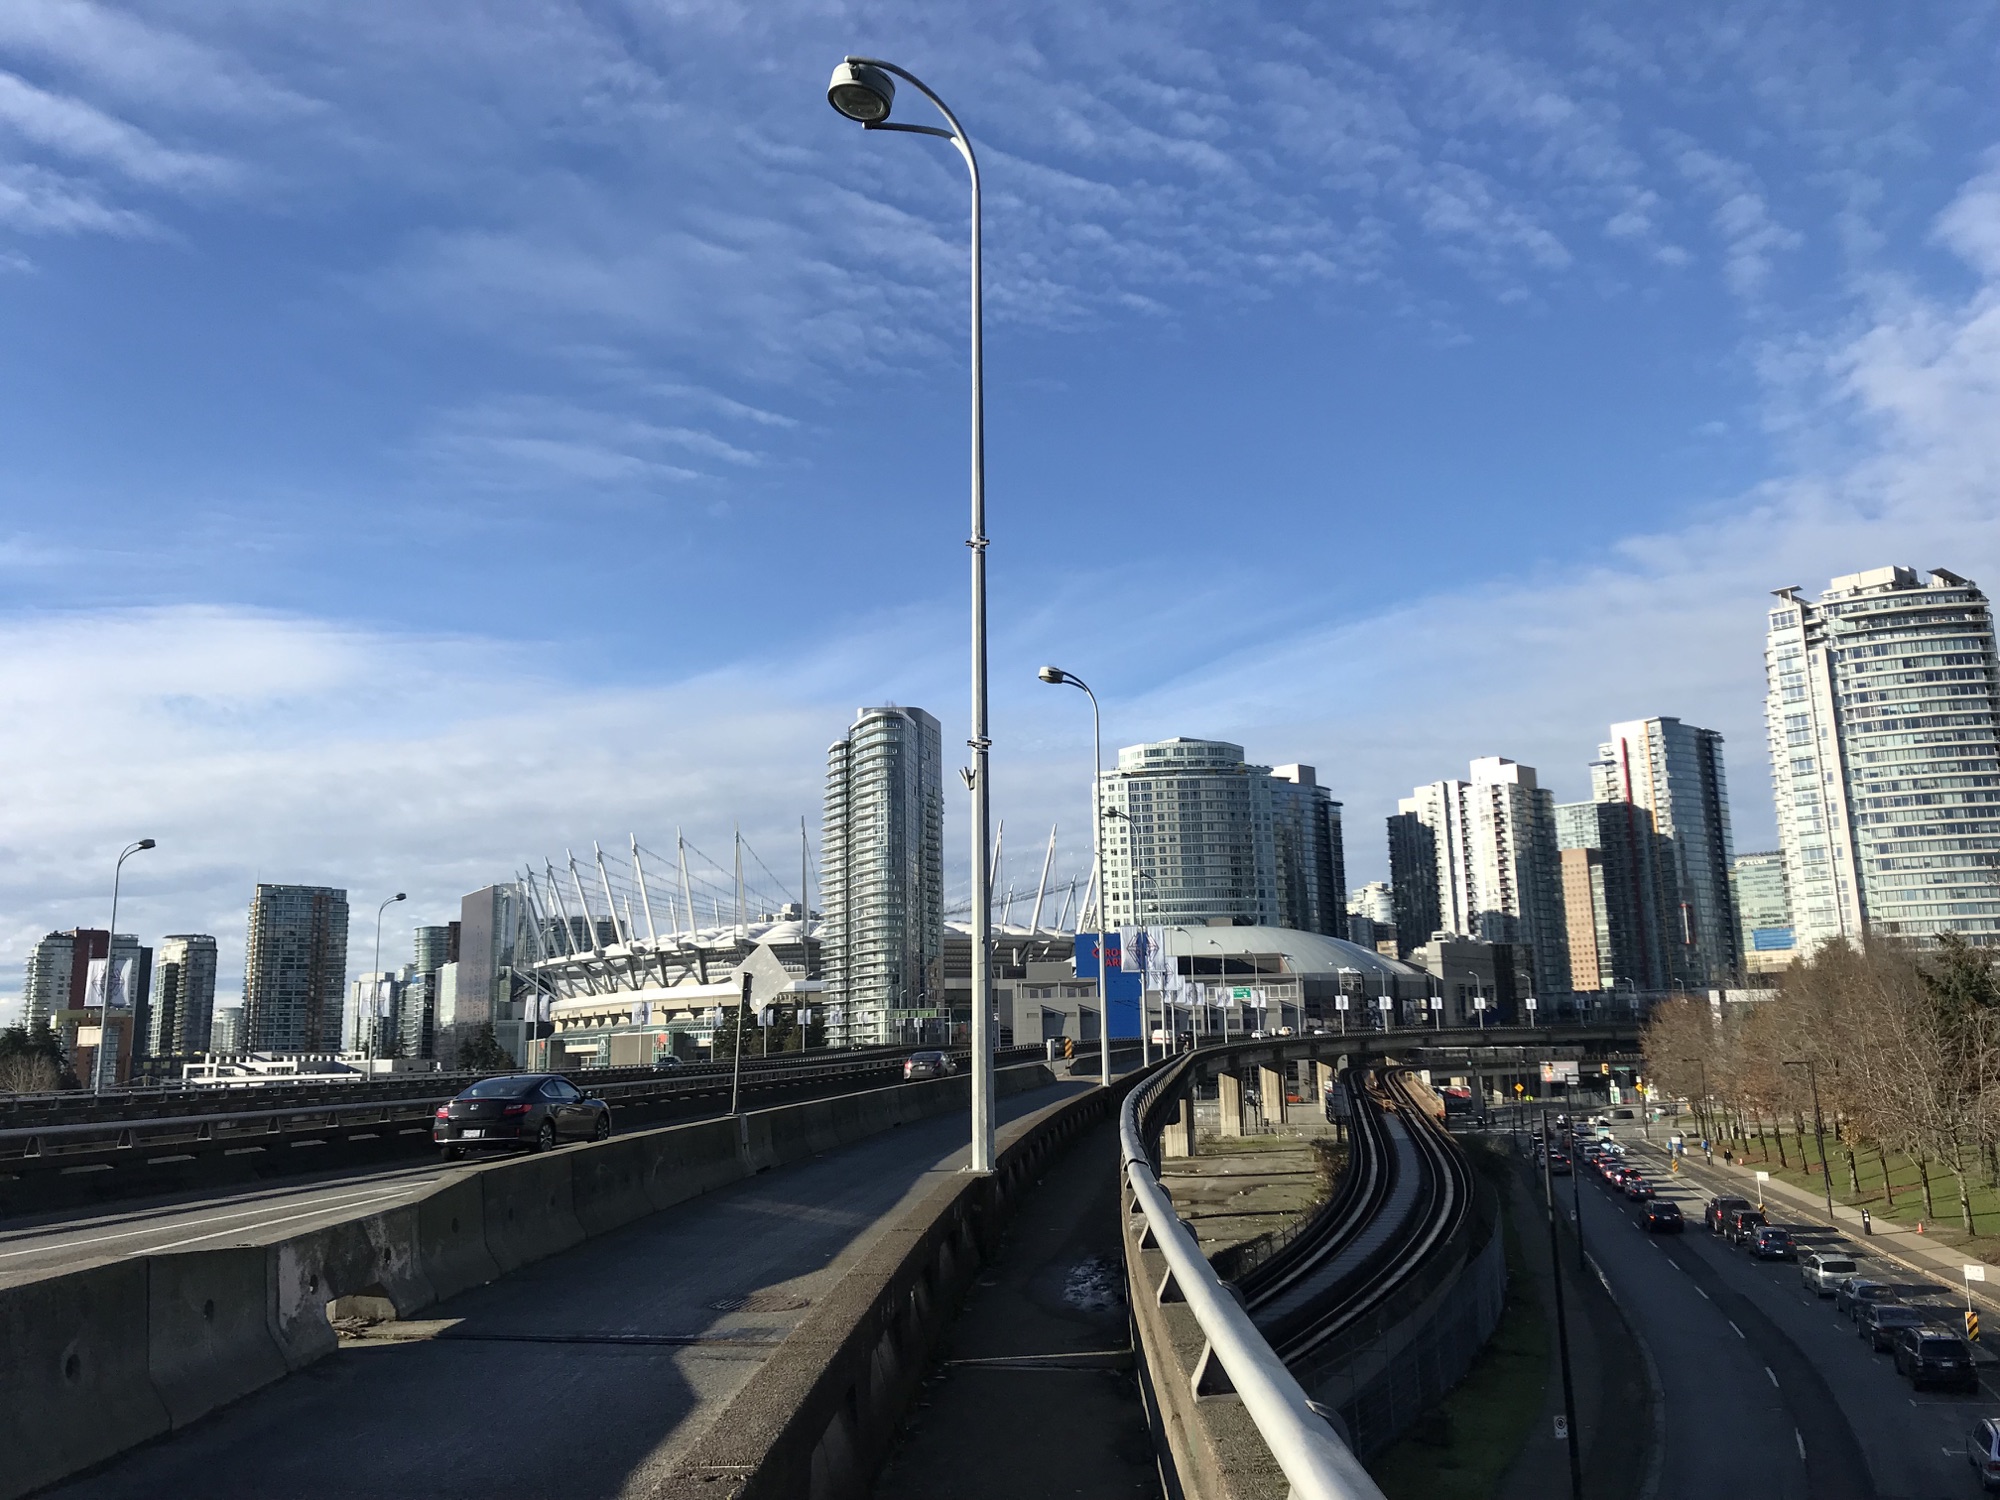 The stadium and sky scrapers of Vancouver